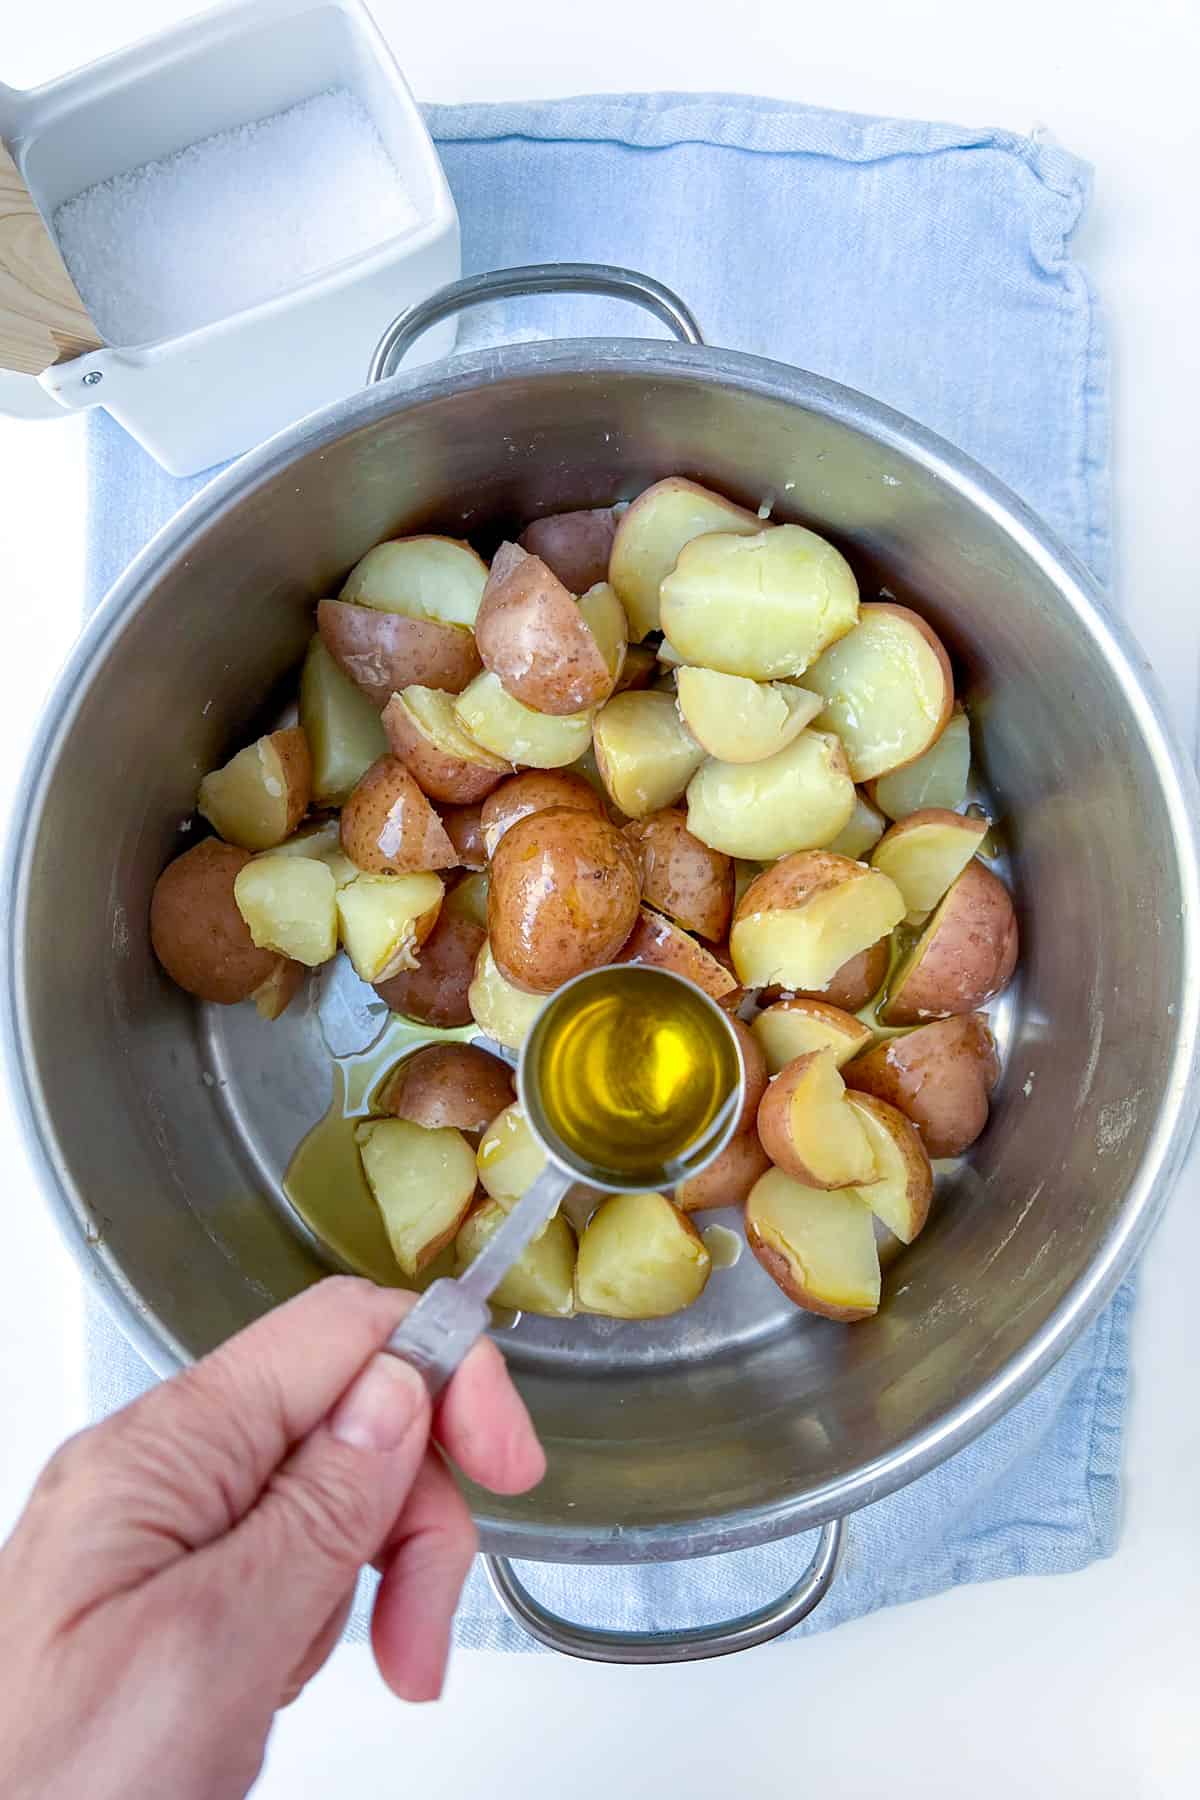 A hand holding a tablespoon of olive oil over a silver pot filled with boiled quartered red skin potatoes.